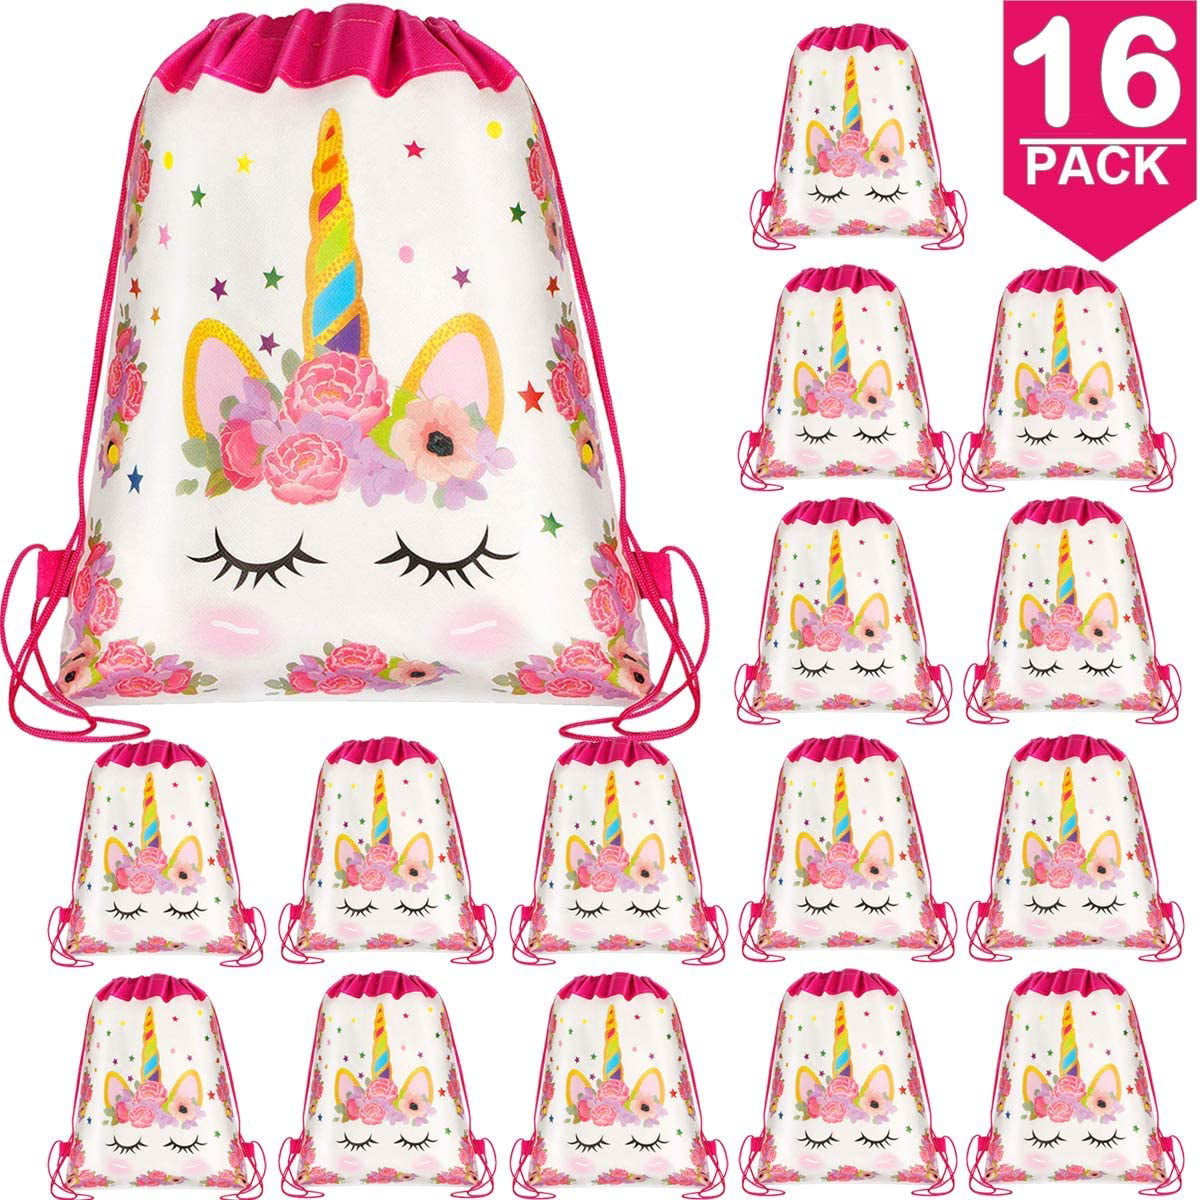 ottoy-16-pack-unicorn-drawstring-party-bag-unicorn-party-favors-bags